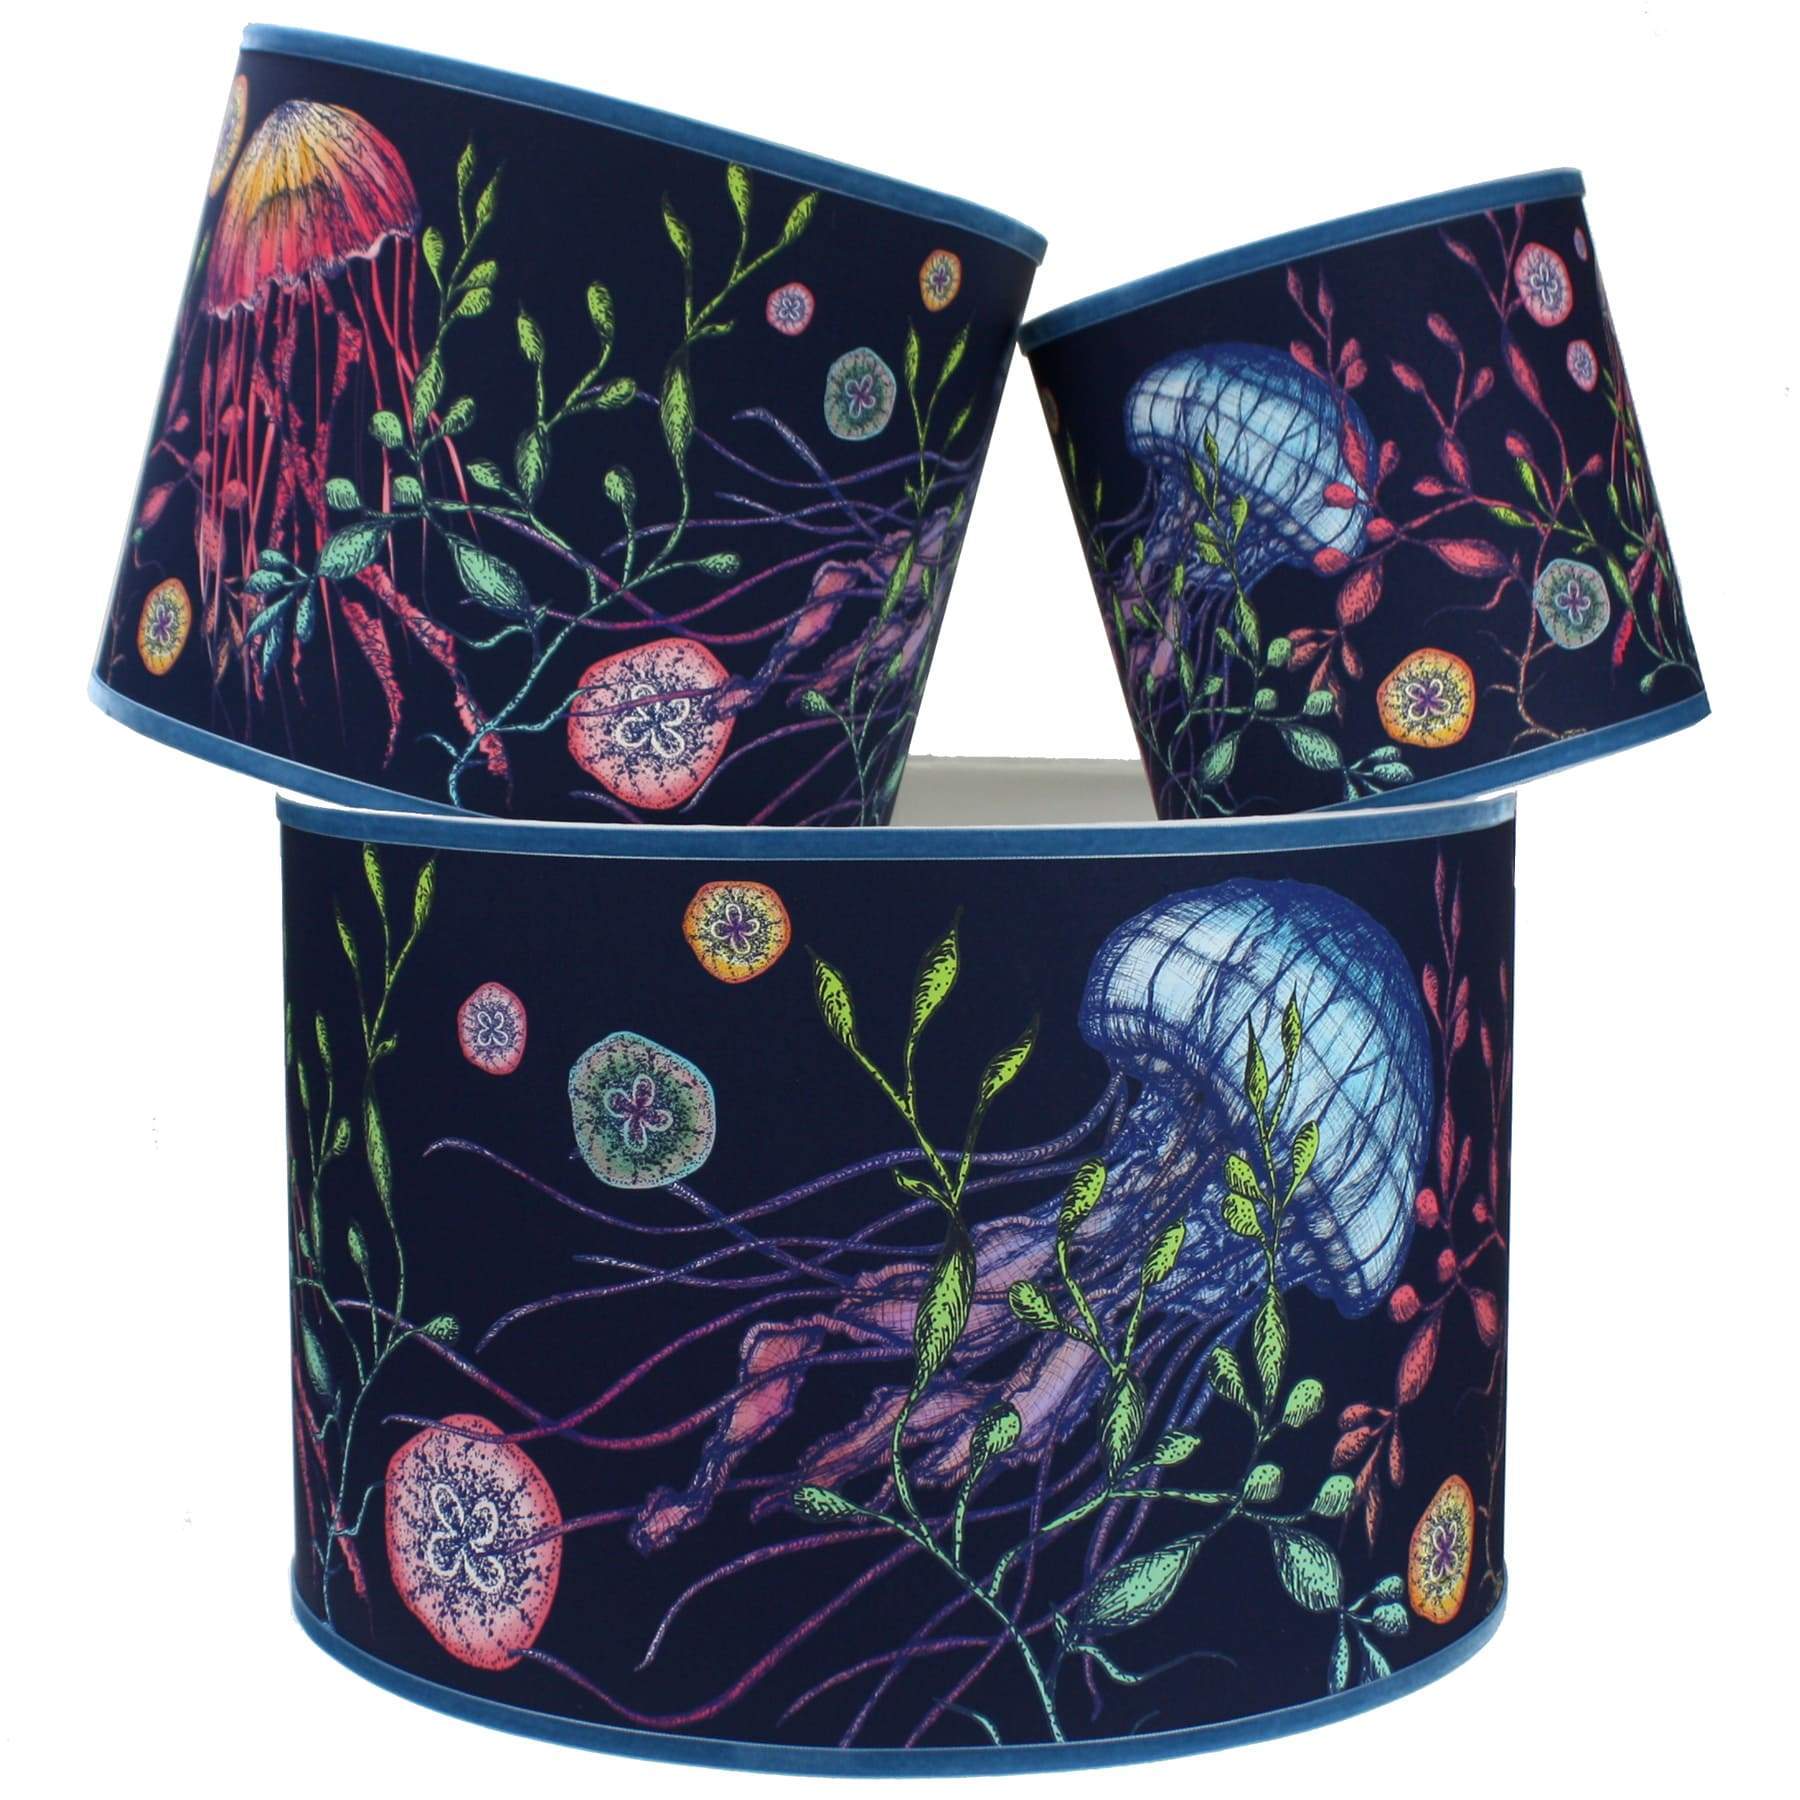 Canyons Reef Navy Shade With Jellyfish Design in bright colours with a blue trim on the edge of the shade.The lampshades are shown in a stack of three showing all three sizes.